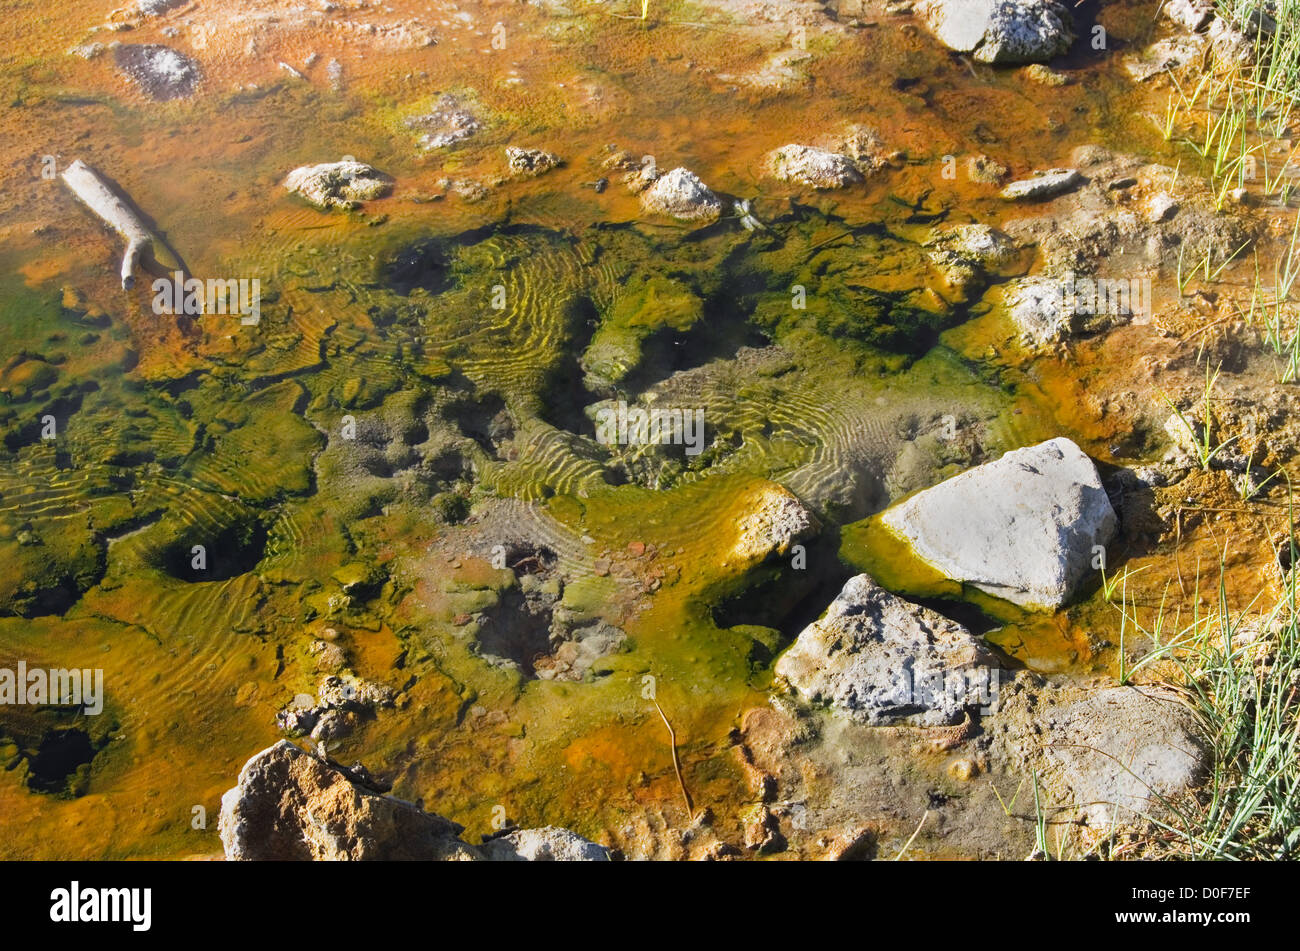 detail of a natural hot spring in the Long Valley Caldera Stock Photo